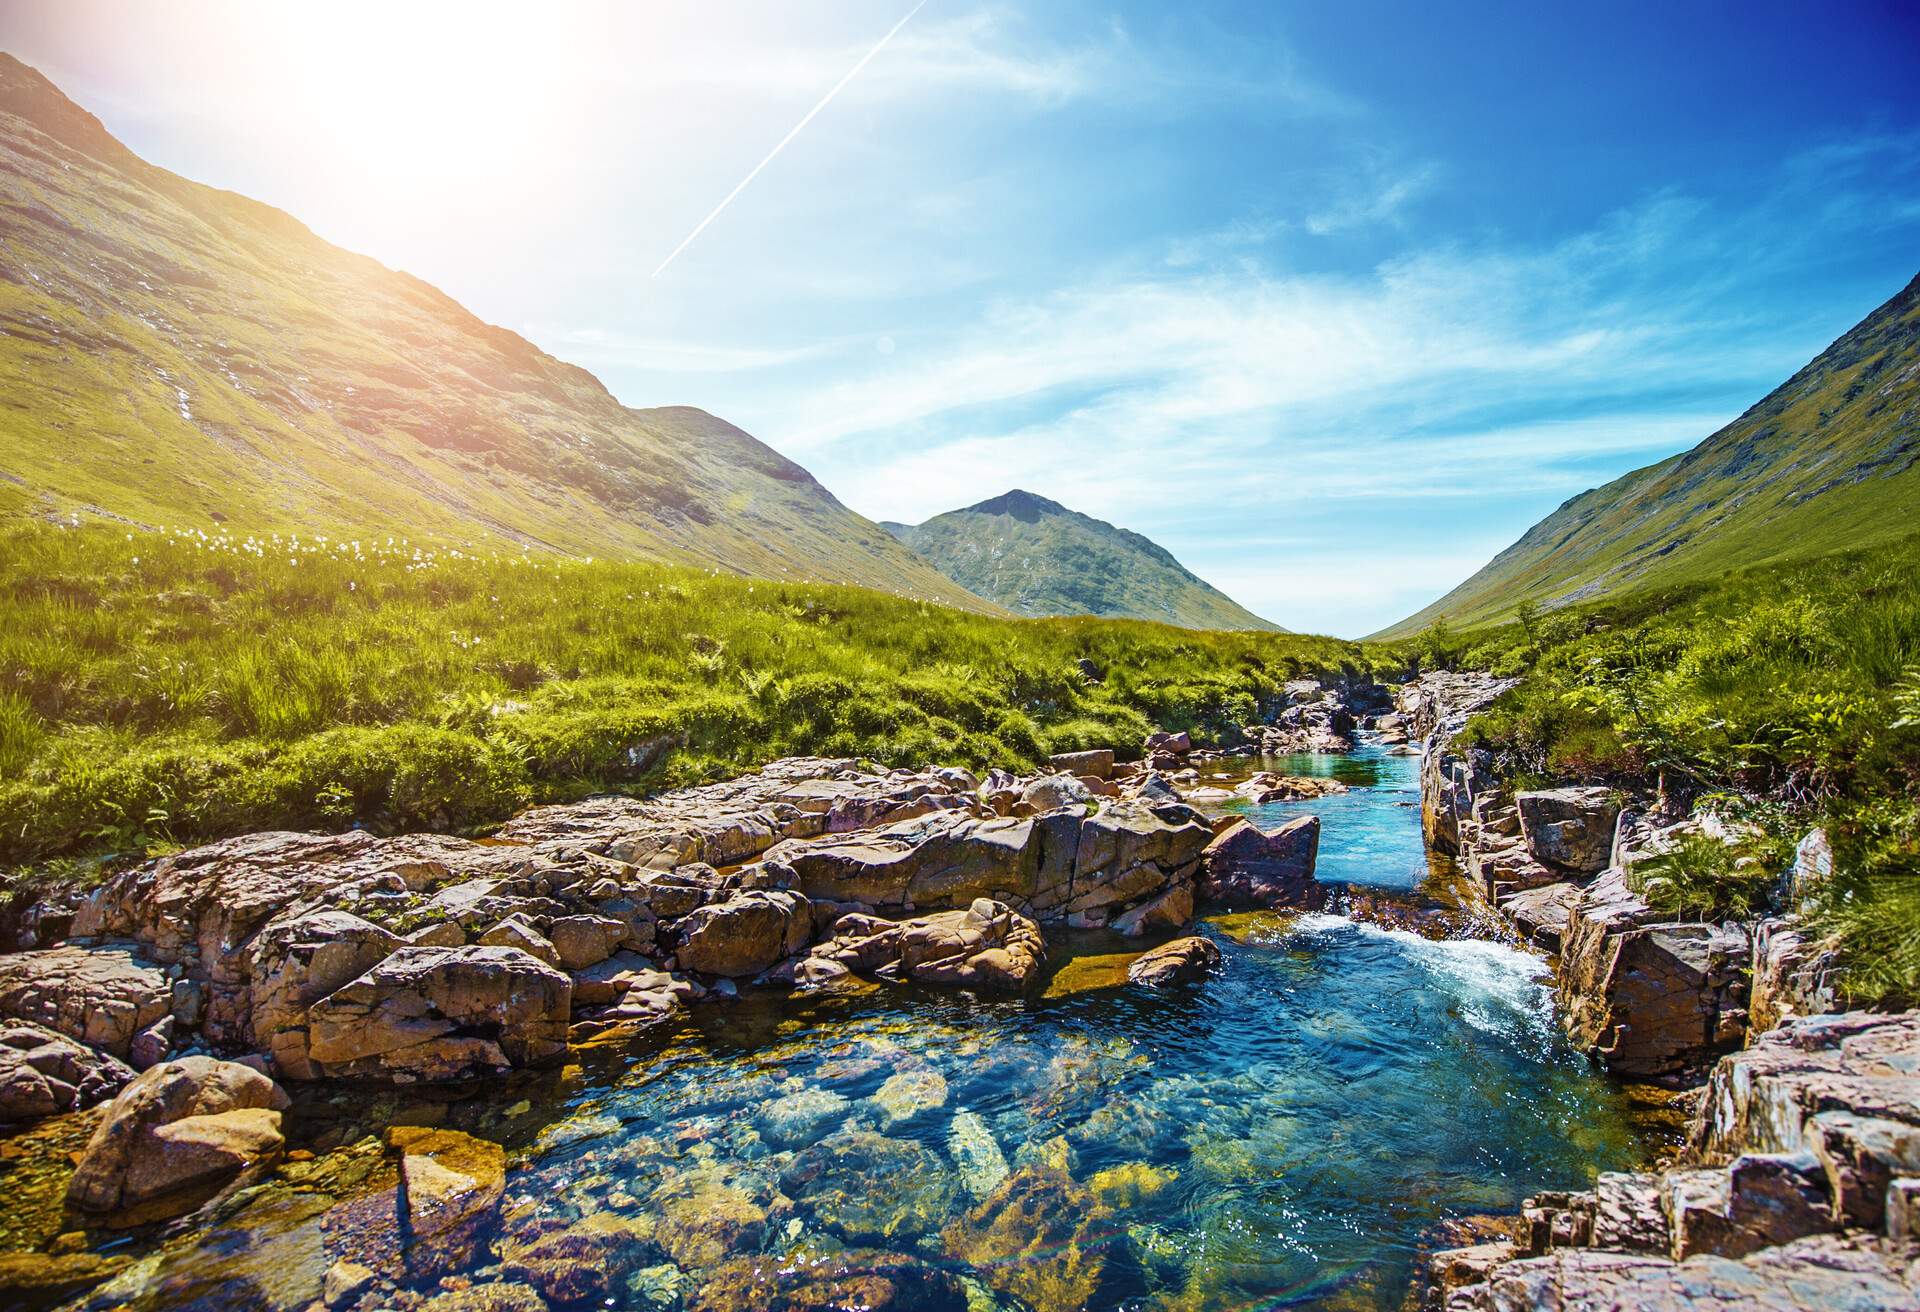 Clear waters flow across a rocky stream between the grassy valleys.